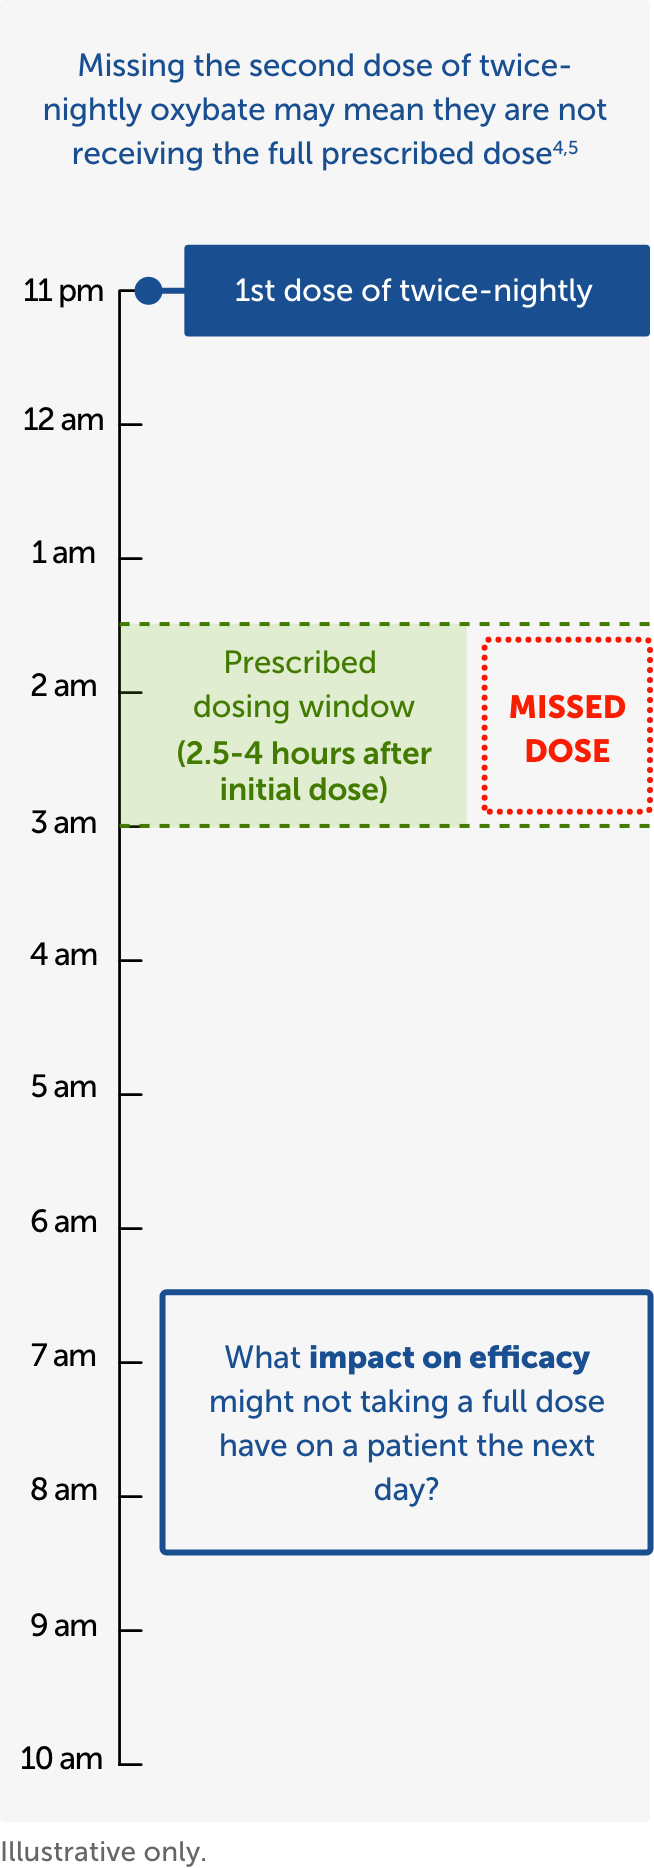 Timeline depicting a missed dose and asking what impact on efficacy not taking a full dose might have on a patient the next day